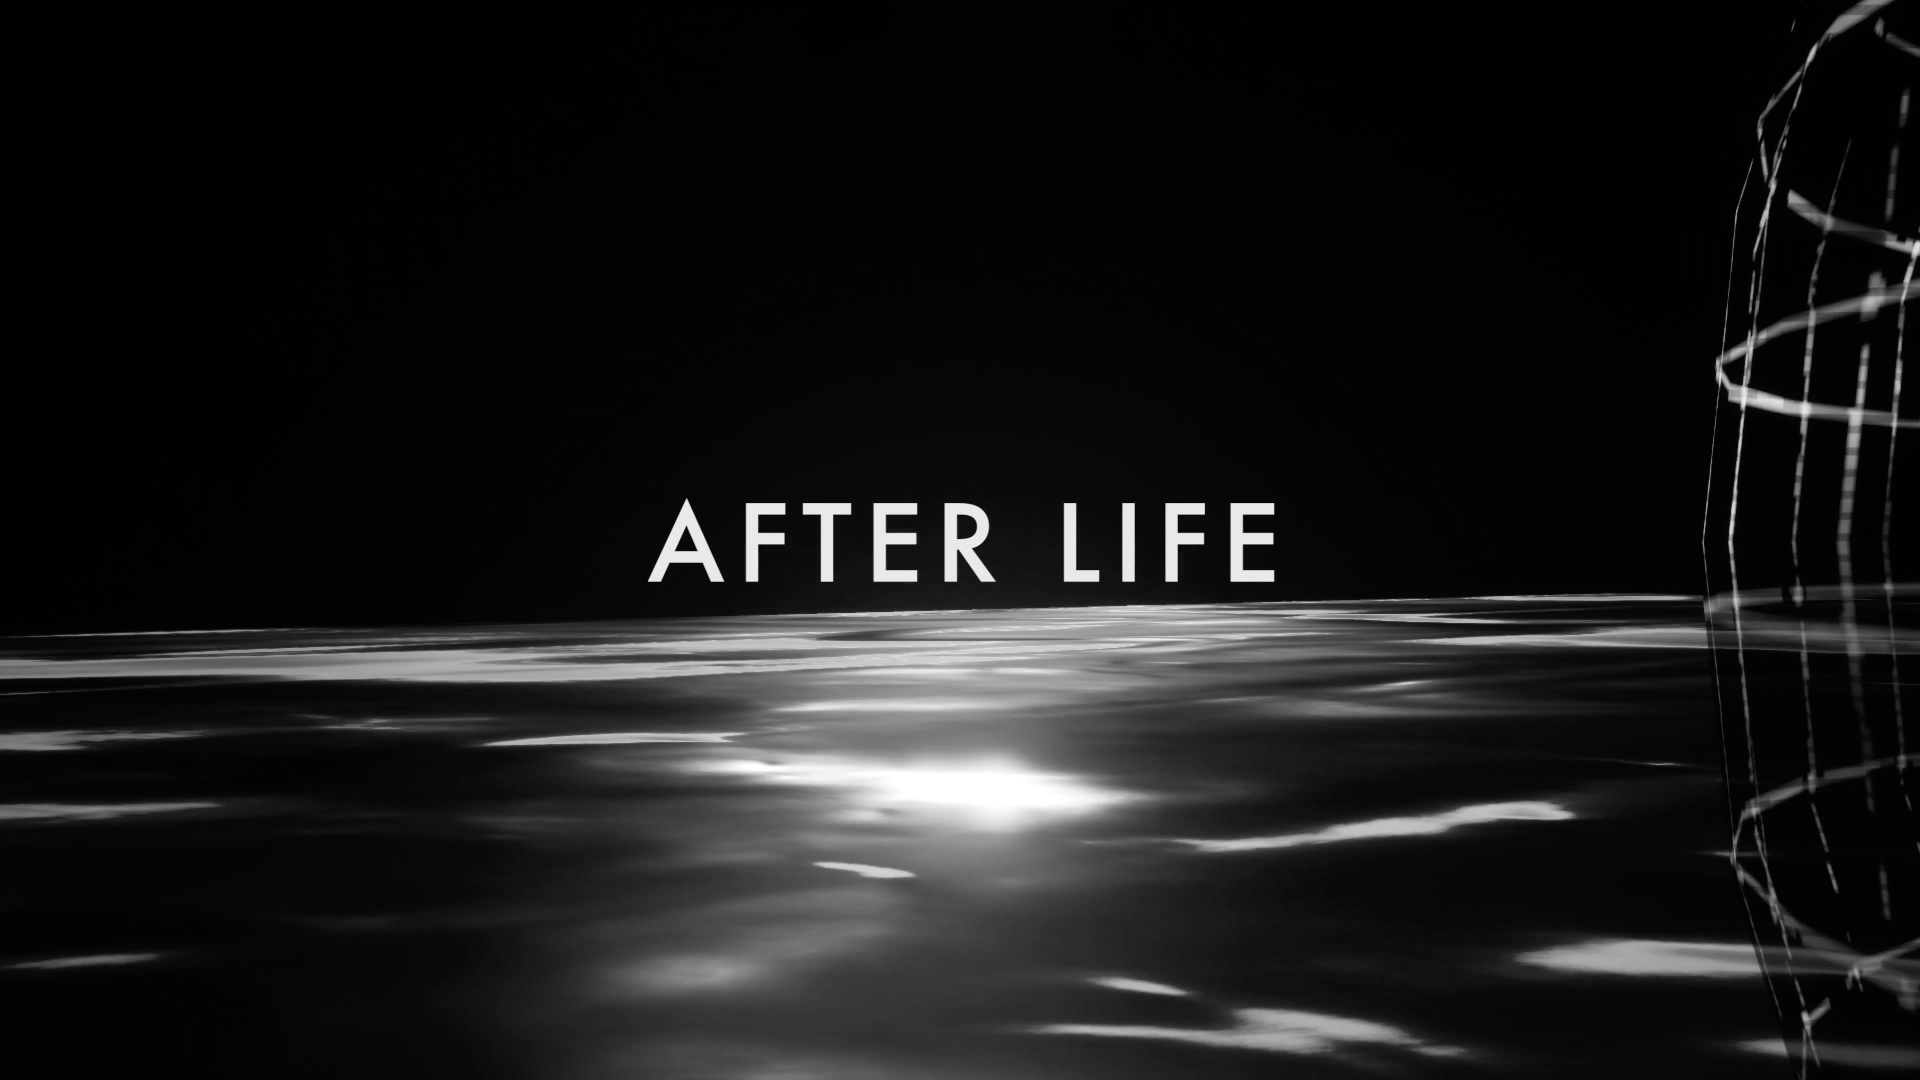 A VR experience about after life